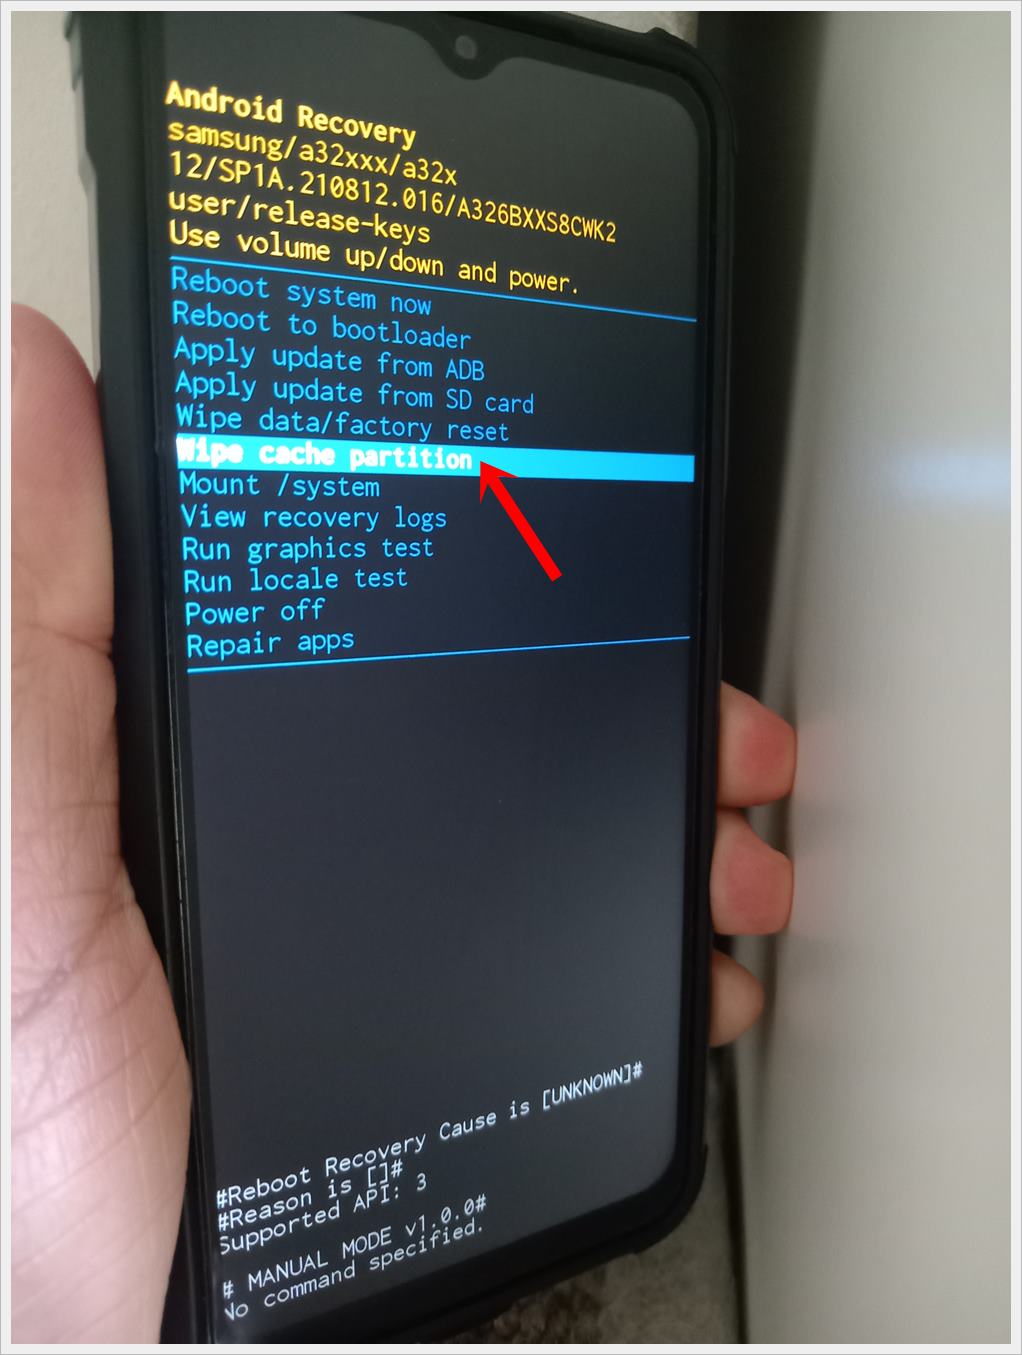 Clear Cache Partition to Fix an Android Phone That Keeps Restarting: This photo shows an Android phone displaying the 'Android Recovery' screen, with the 'Wipe Cache Partition' option highlighted.